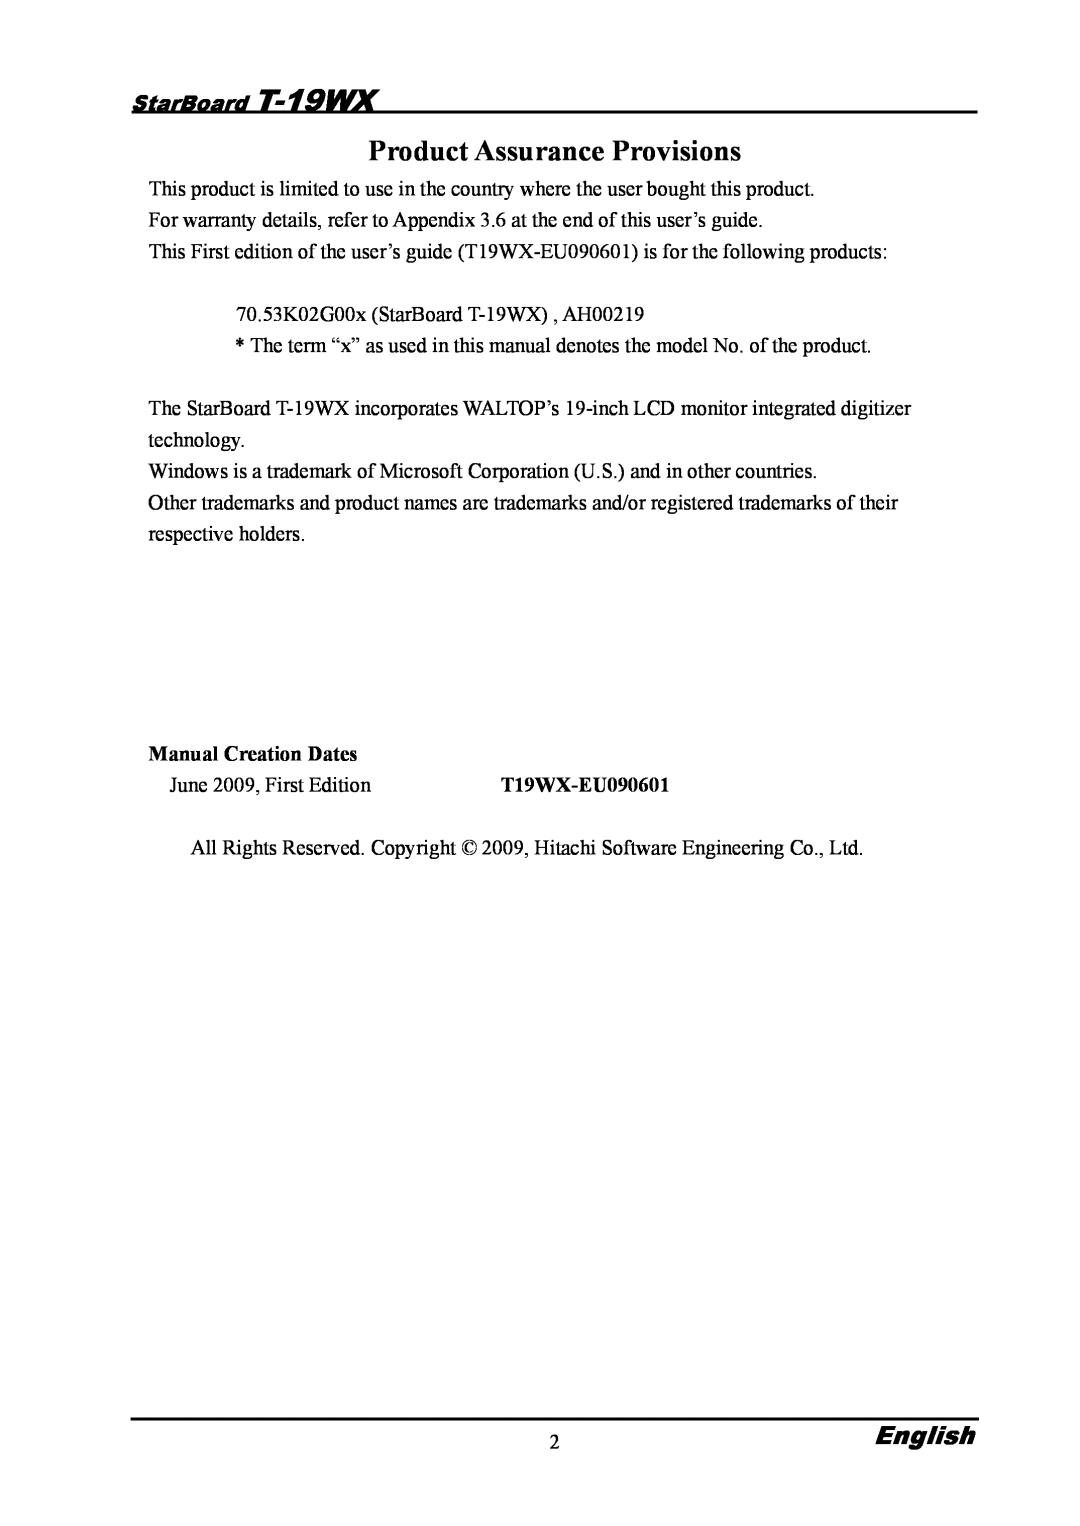 Hitachi Product Assurance Provisions, 2English, StarBoard T-19WX, Manual Creation Dates, June 2009, First Edition 